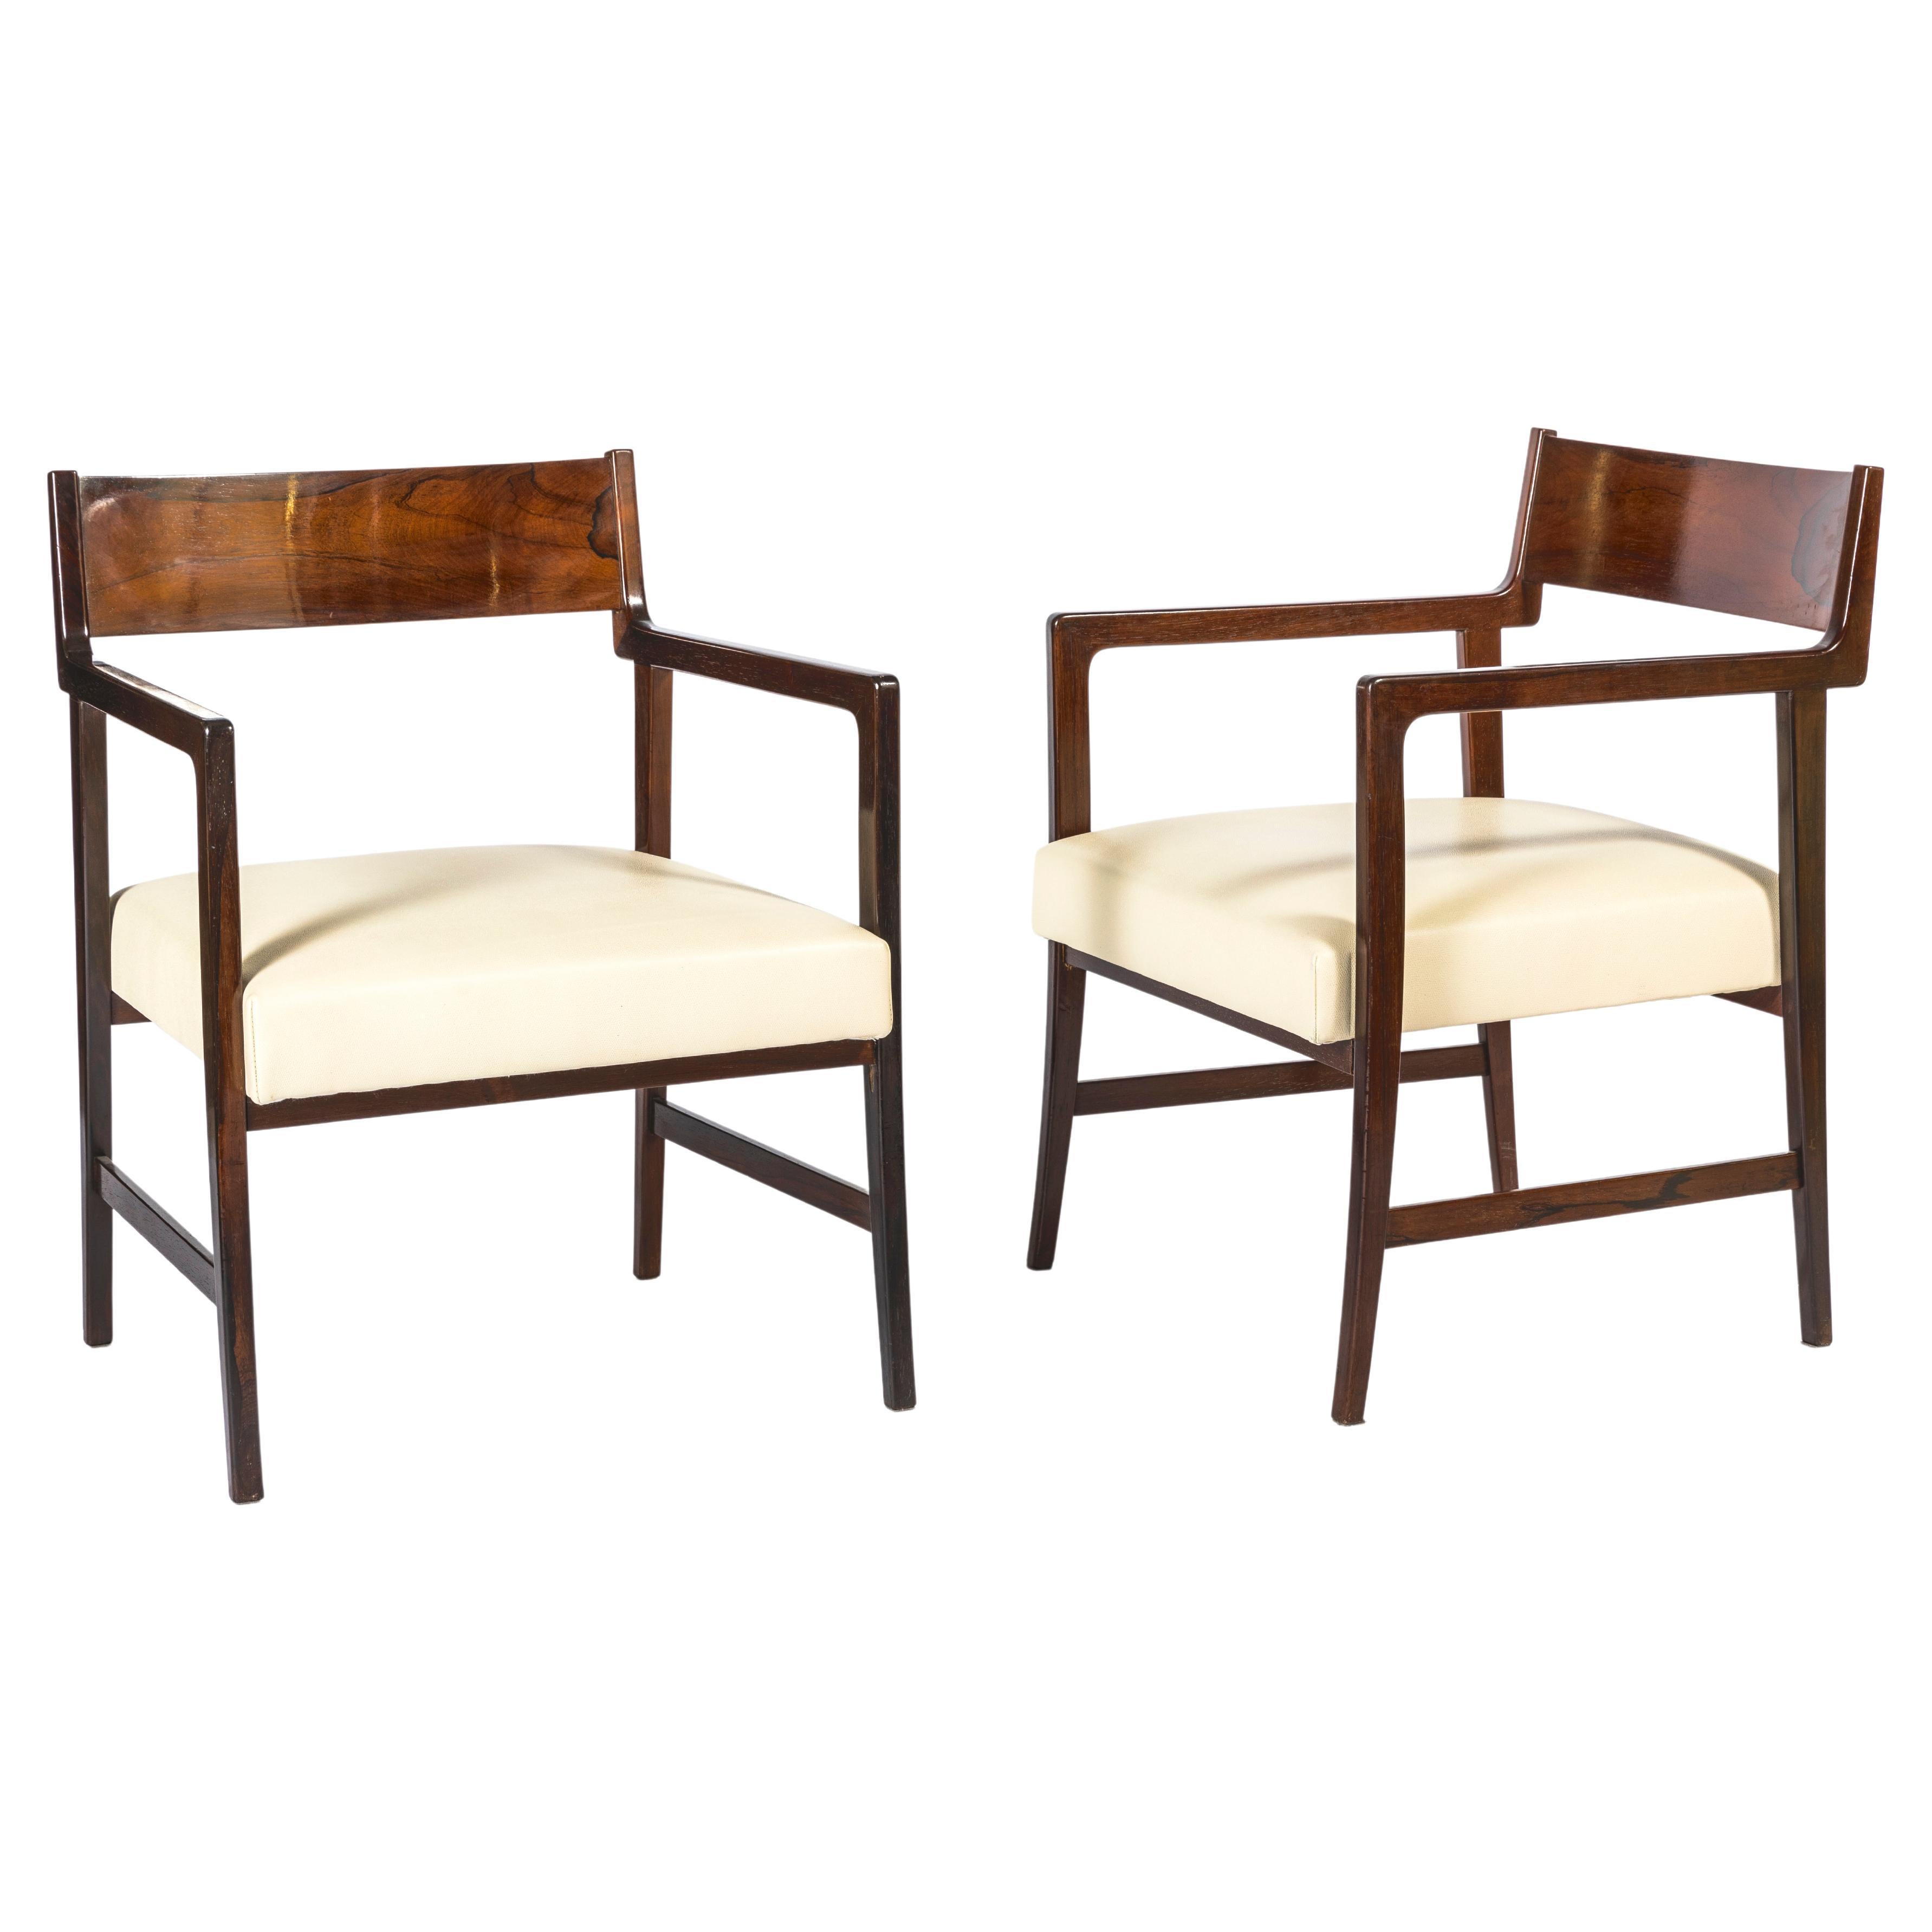 Pair of Armchairs by Joaquim Tenreiro, Wood and Leather, 1950